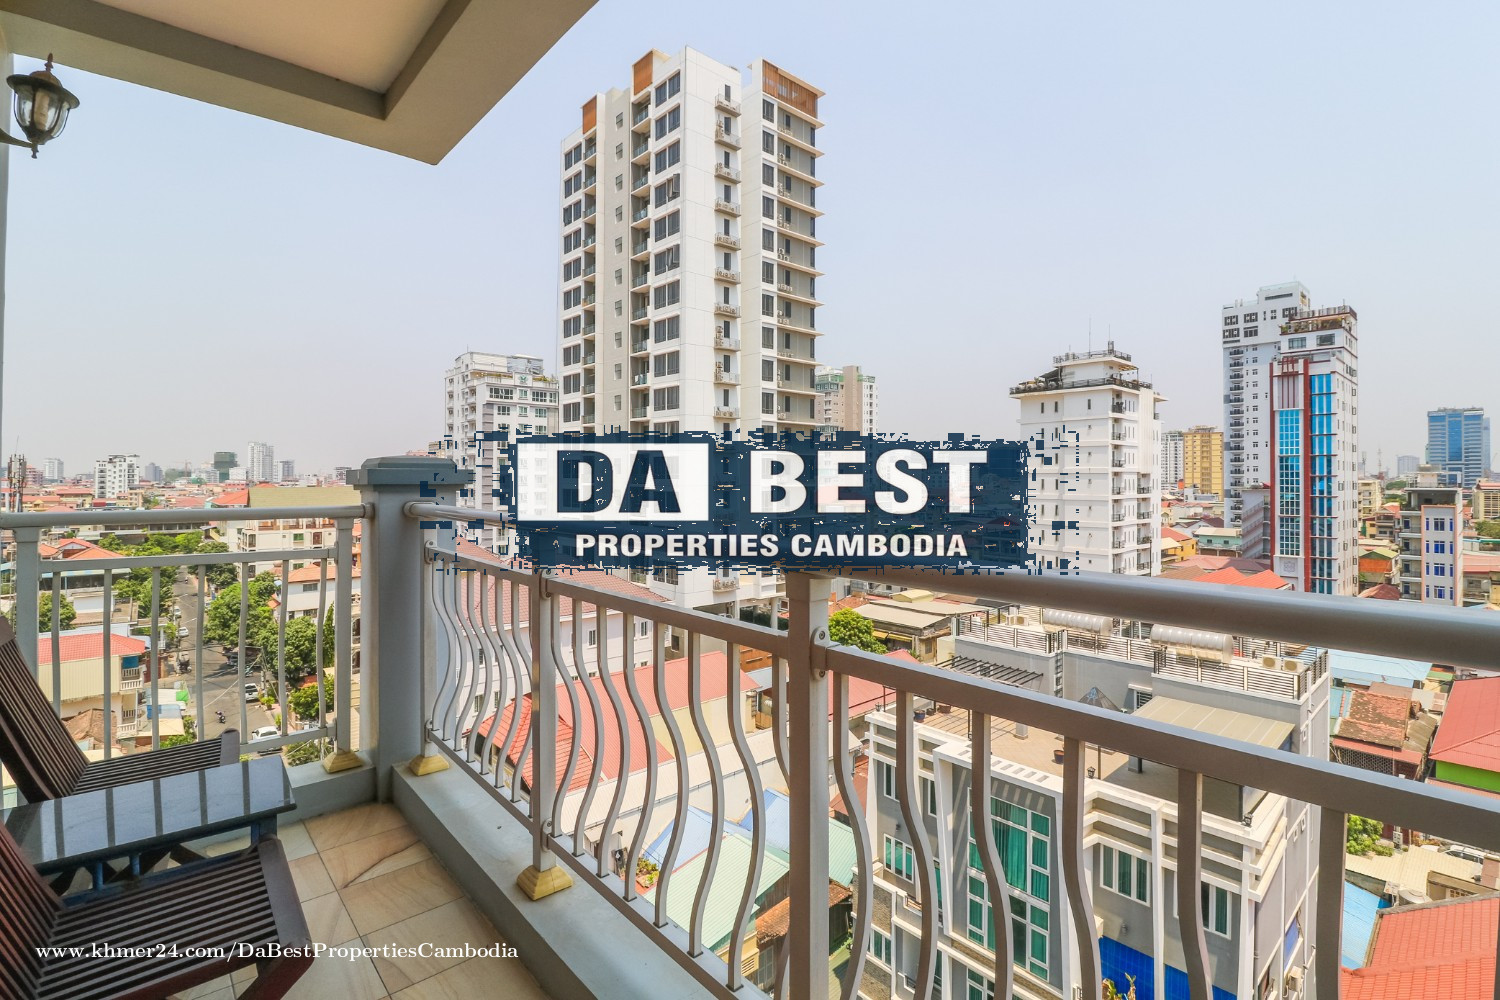 DABEST PROPERTIES: 1 Bedroom Apartment for Rent with Gym, Swimming pool in Phnom Penh-BKK3